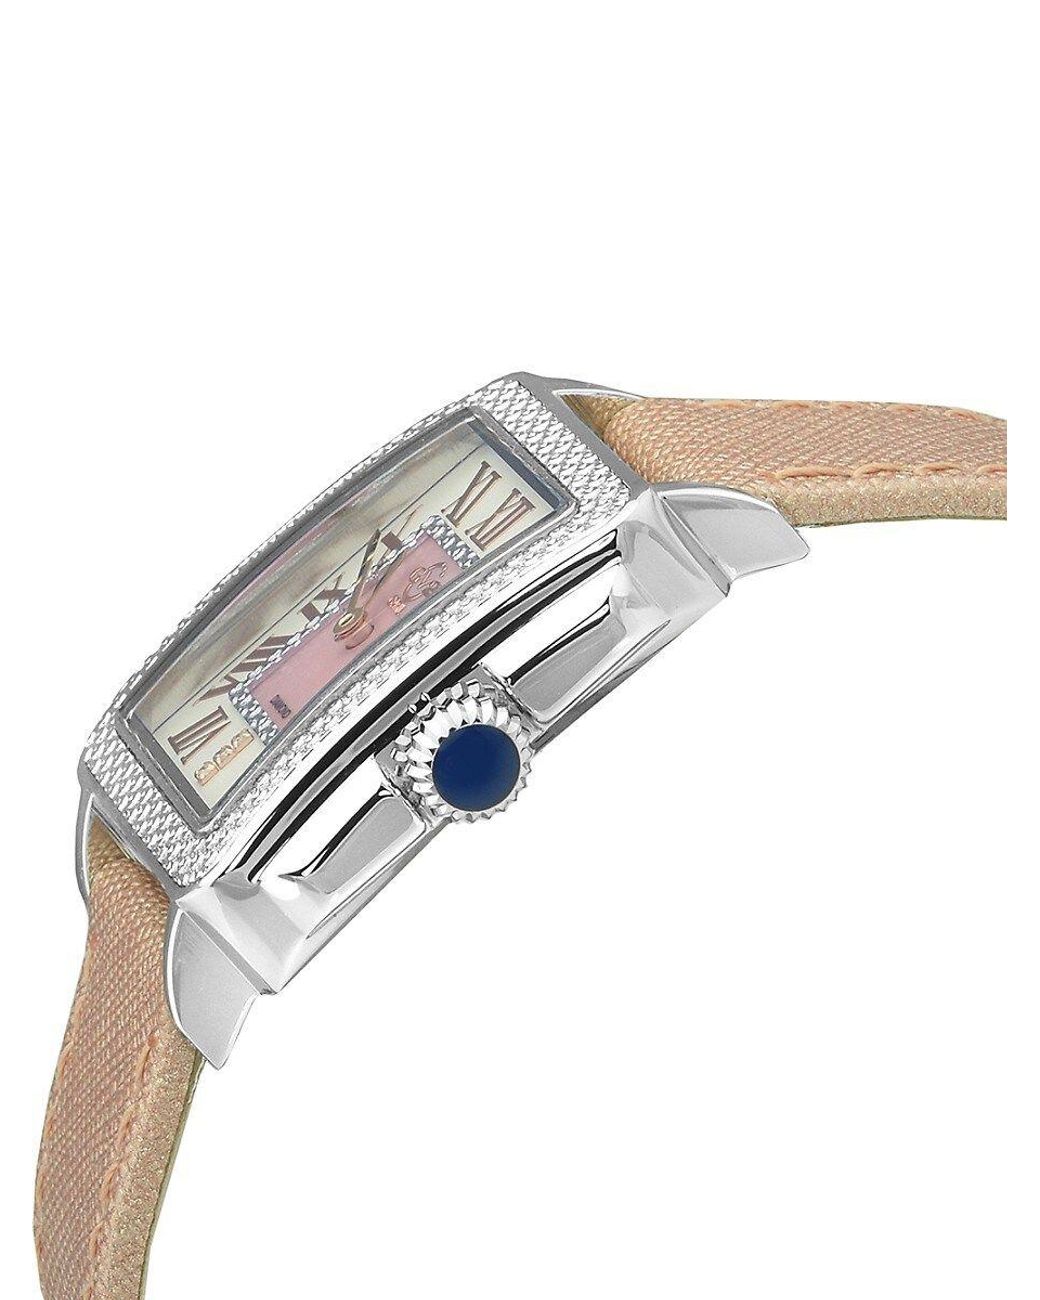 Gv2 Padova 30mm Sapphire Crystal & Leather Strap Watch in White | Lyst